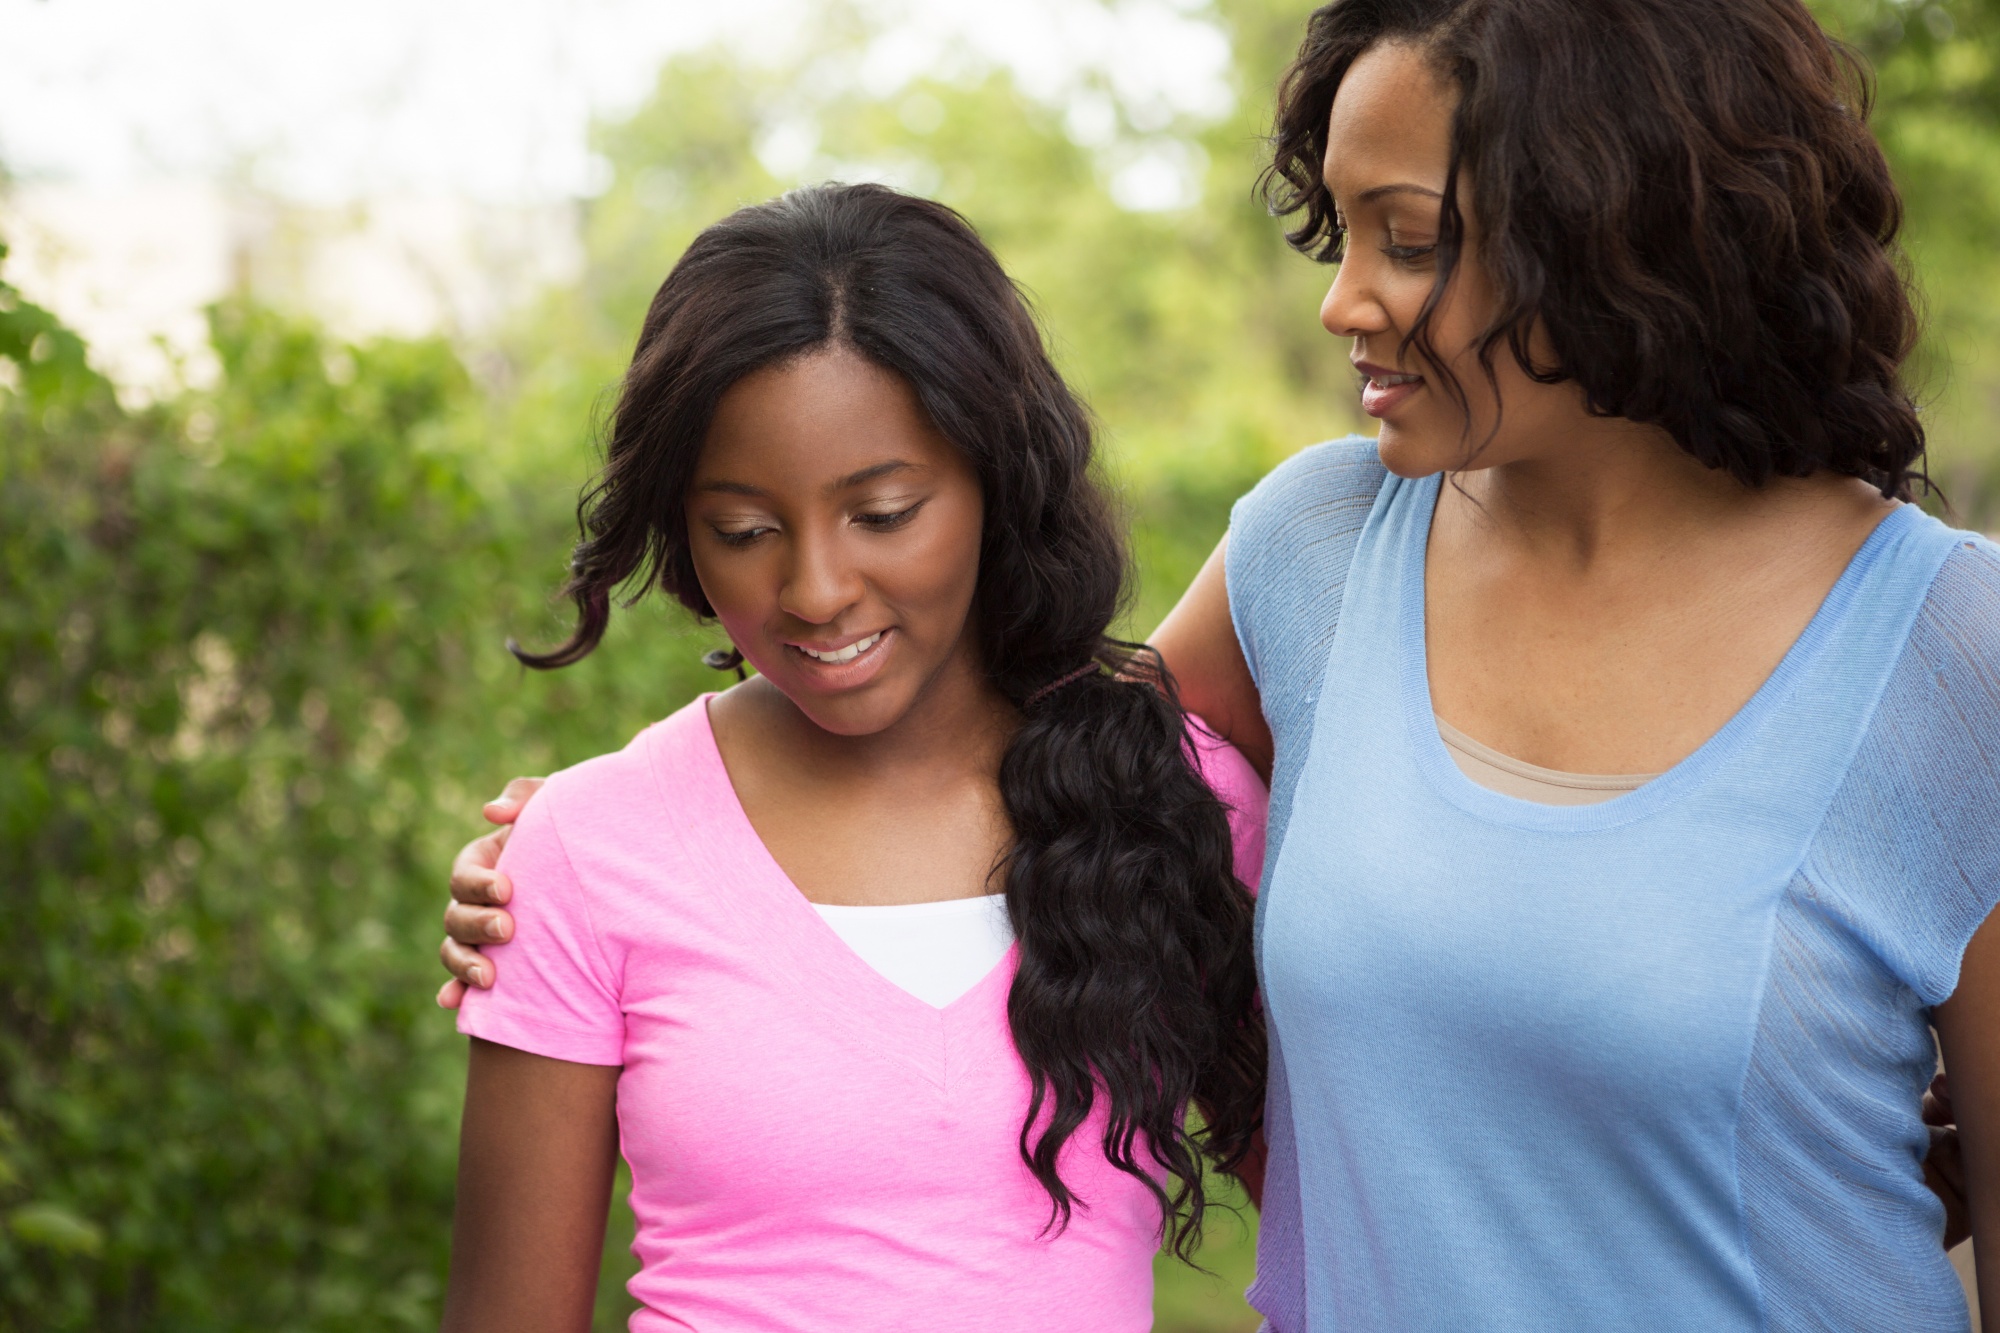 talking about sex, African-American mother and daughter walking outside together and smiling